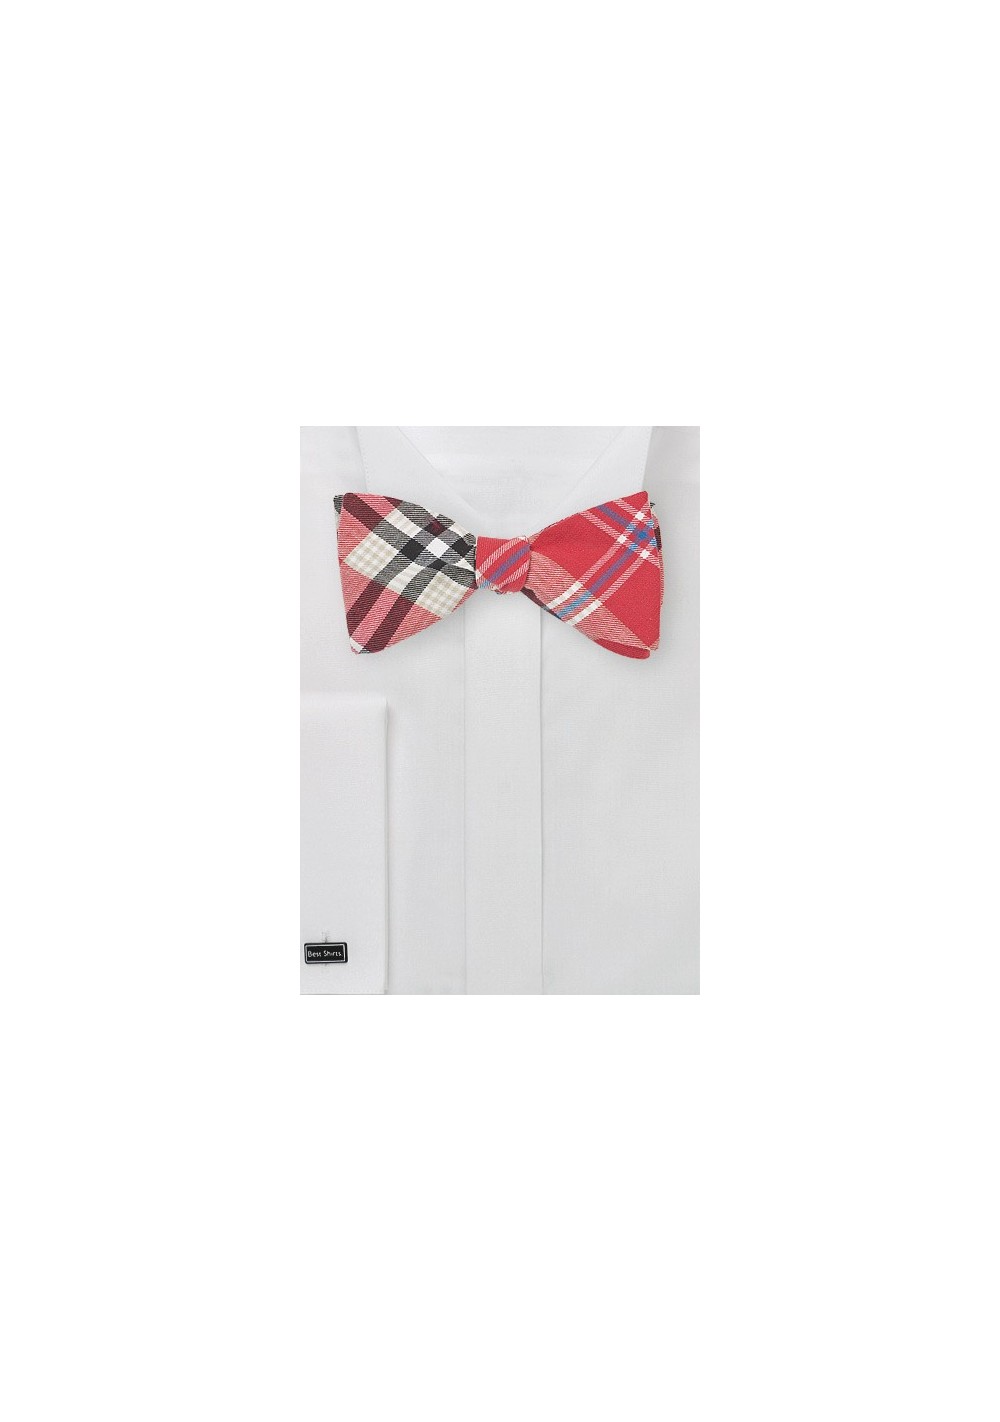 Cotton Plaid Bow Tie in Summer Reds